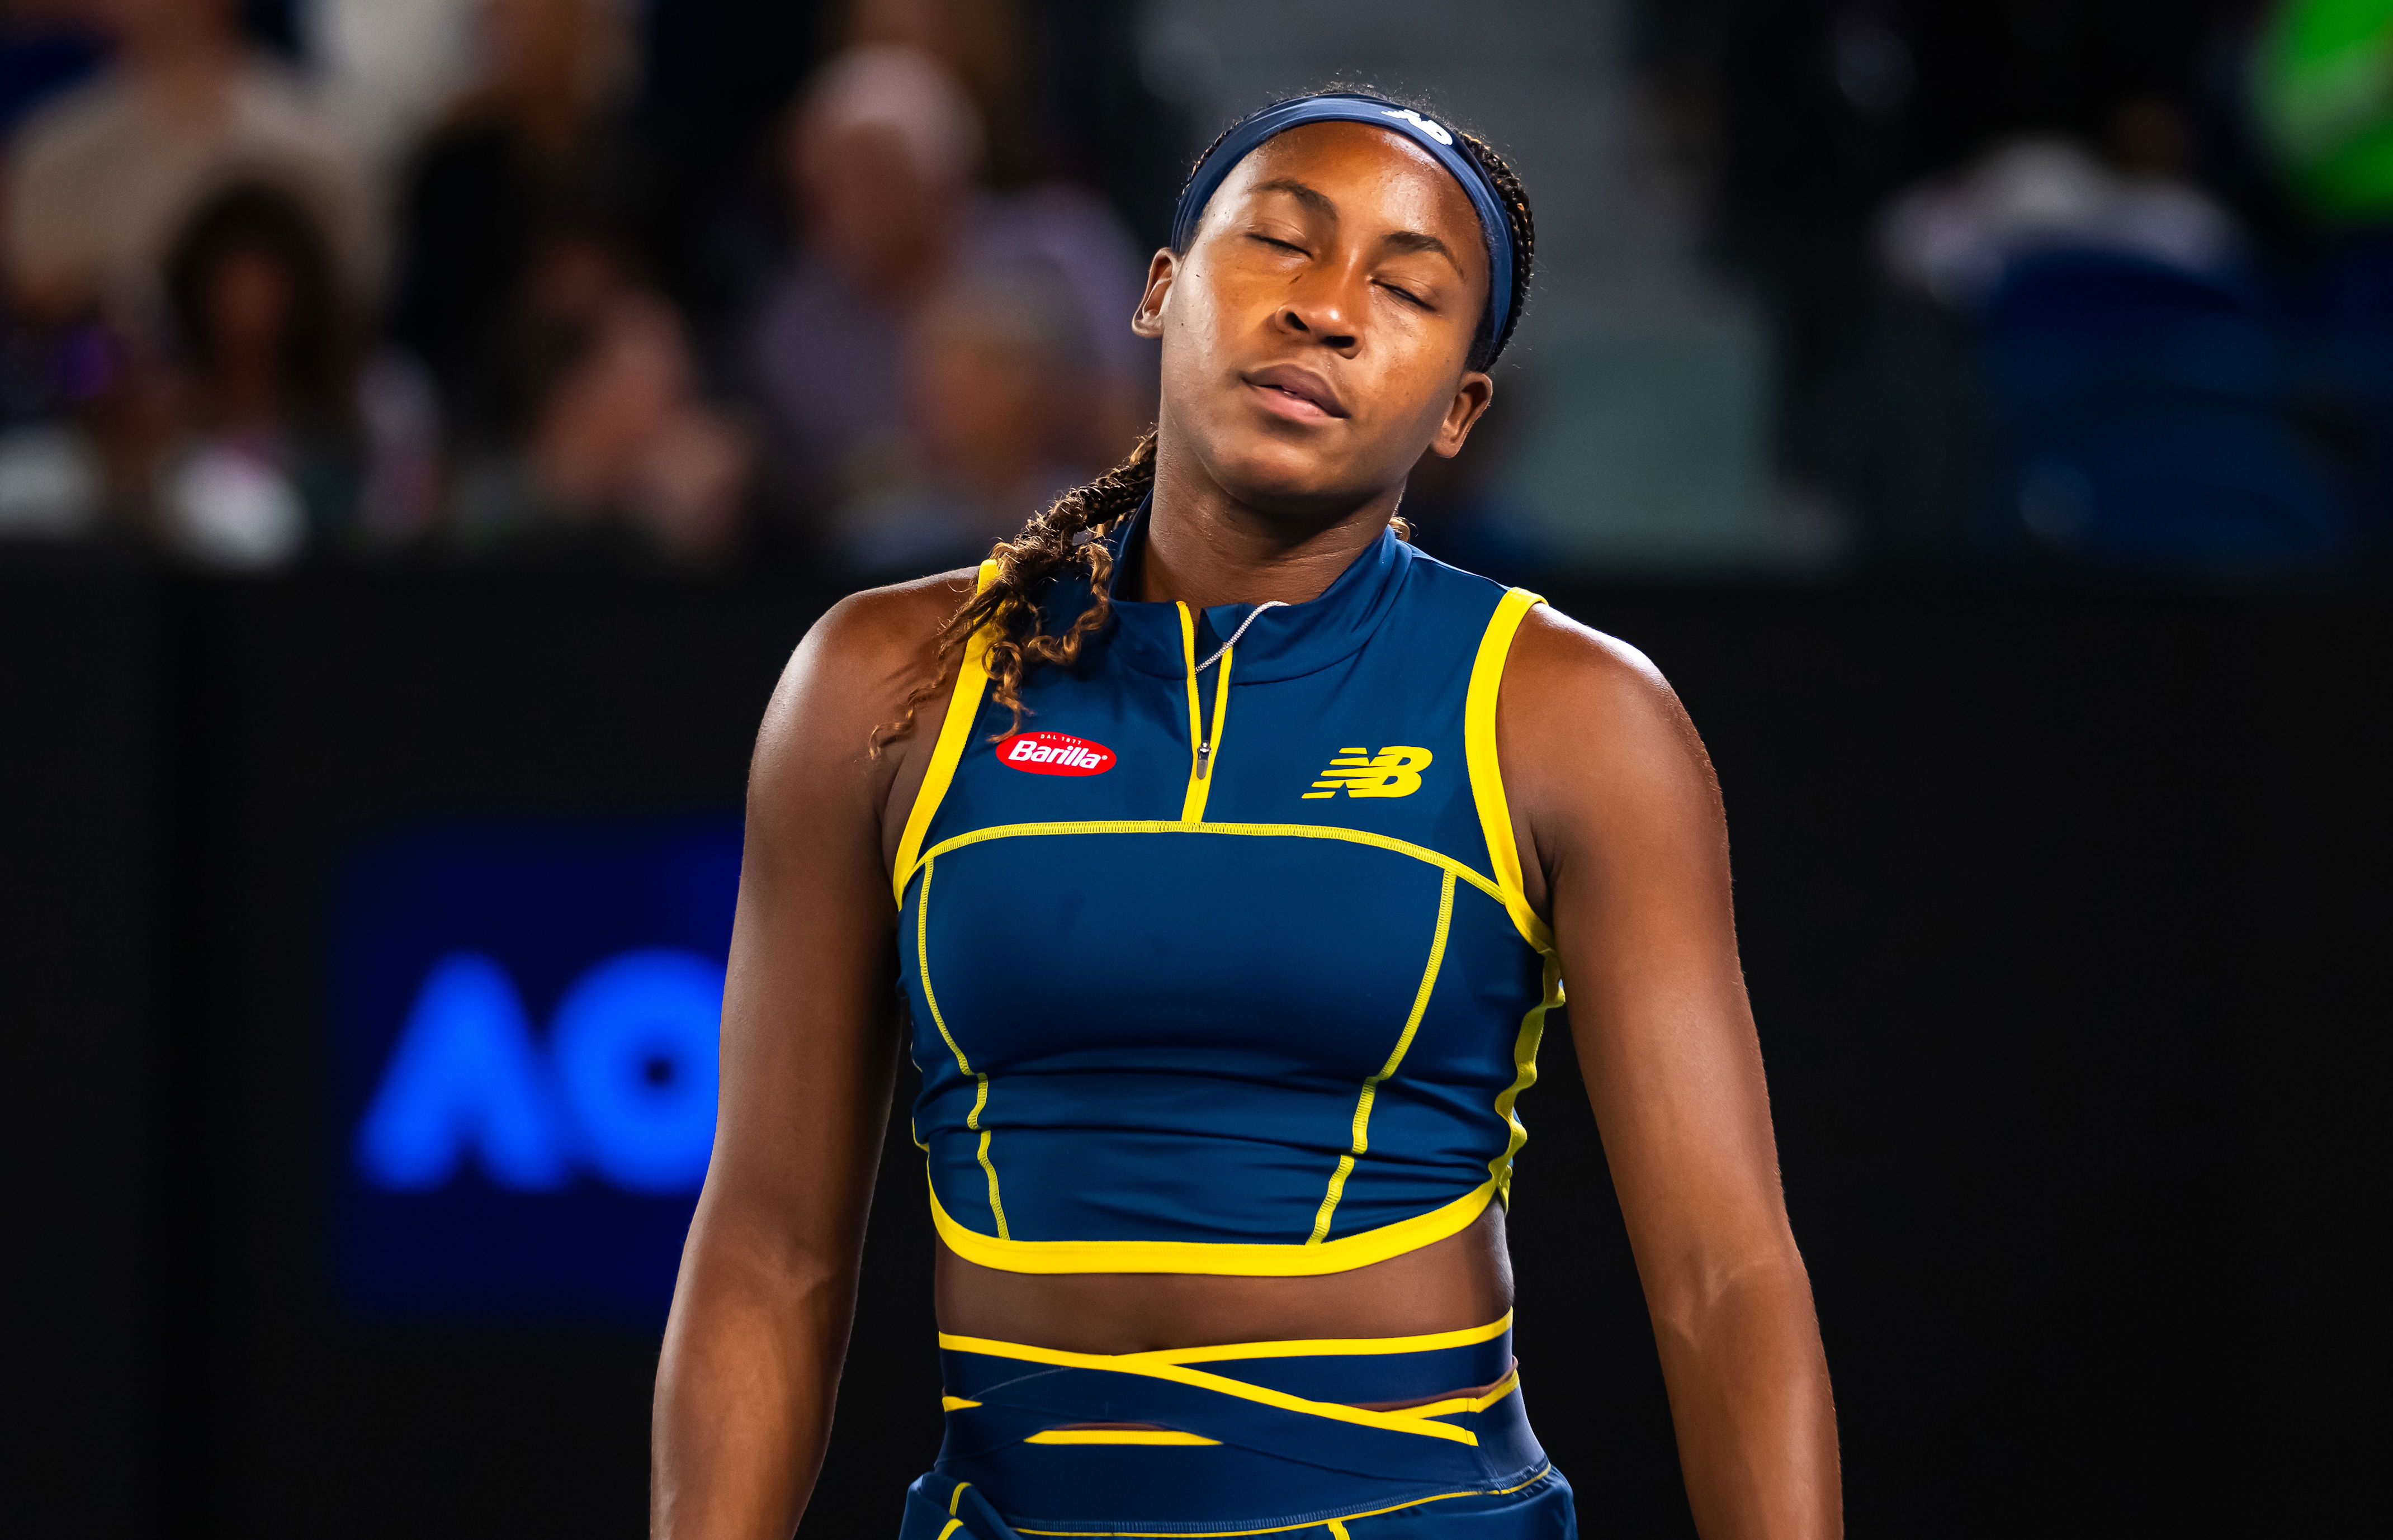 beaten gauff denies distraction from opponent's act